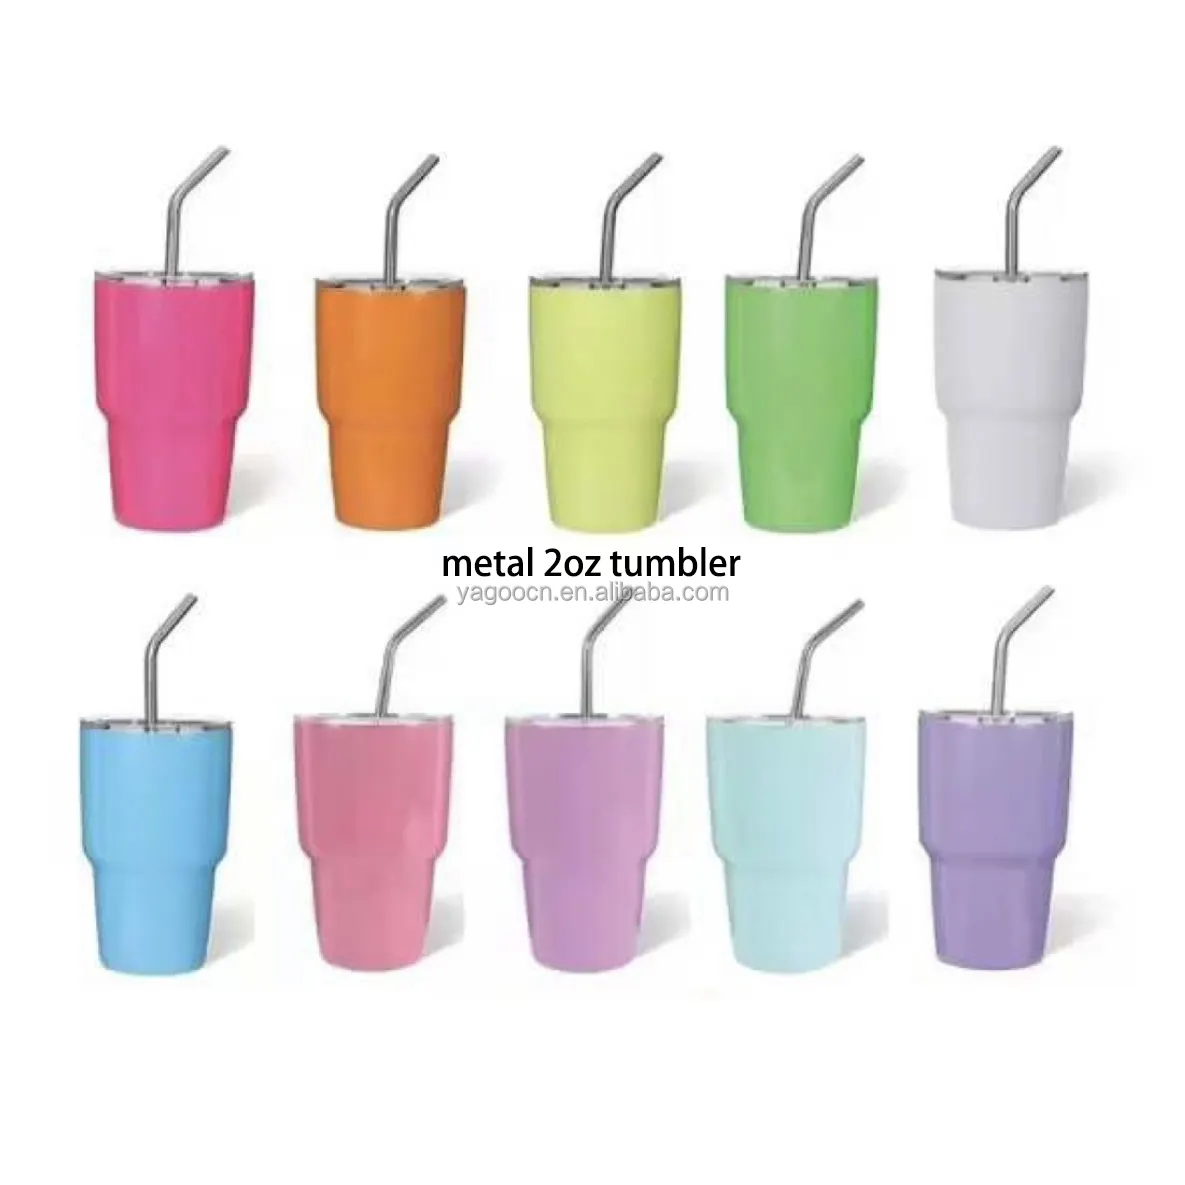 Double Wall 2oz shot tumbler cup stainless steel miniature tumbler bottle metal mini 2oz shot glass tumbler with straw lid